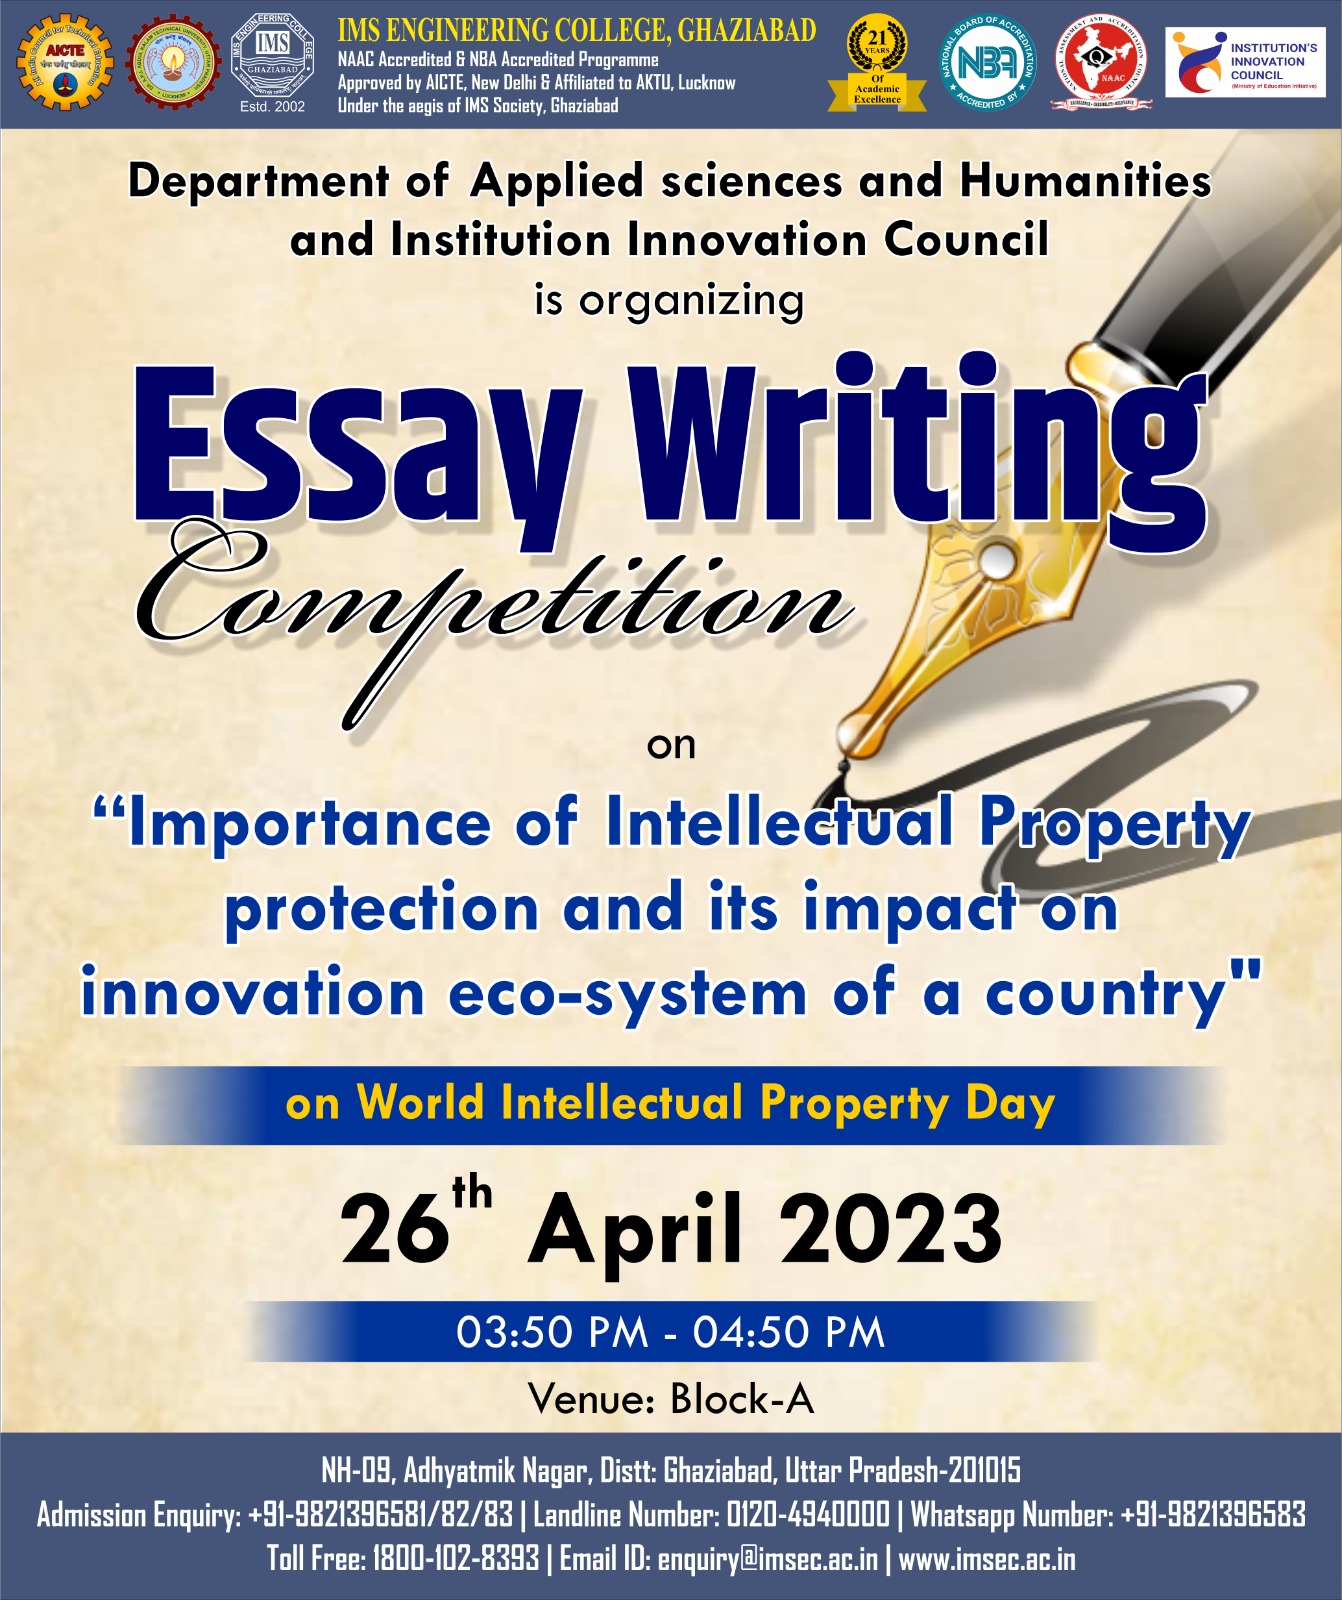 Essay writing competition on the occasion of World Intellectual Property Day